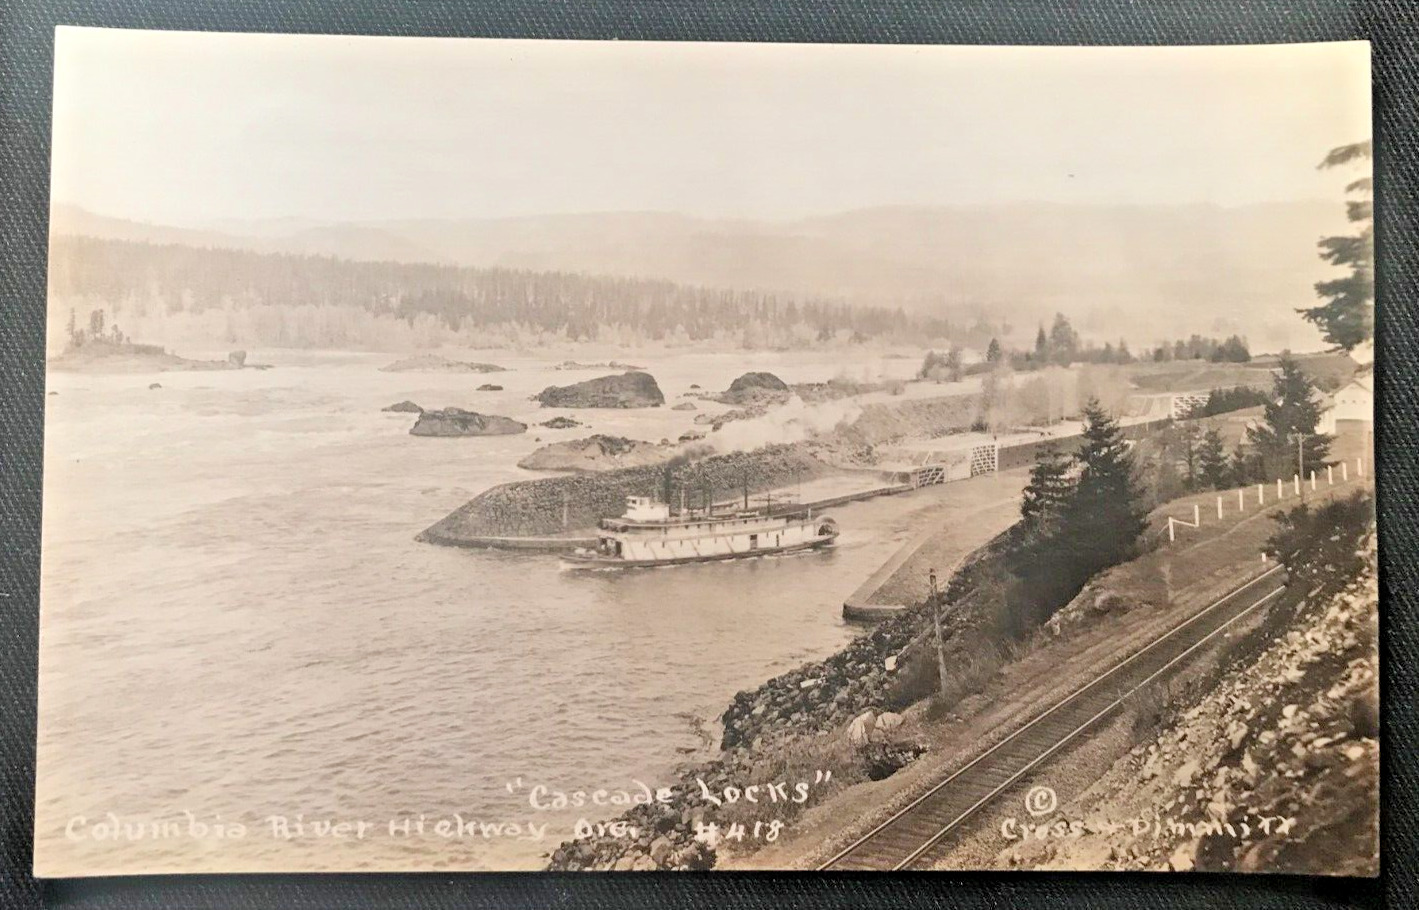 REAL PHOTO ANTIQUE POSTCARD - Cascade Locks, Columbia River Highway, OR w/Boat